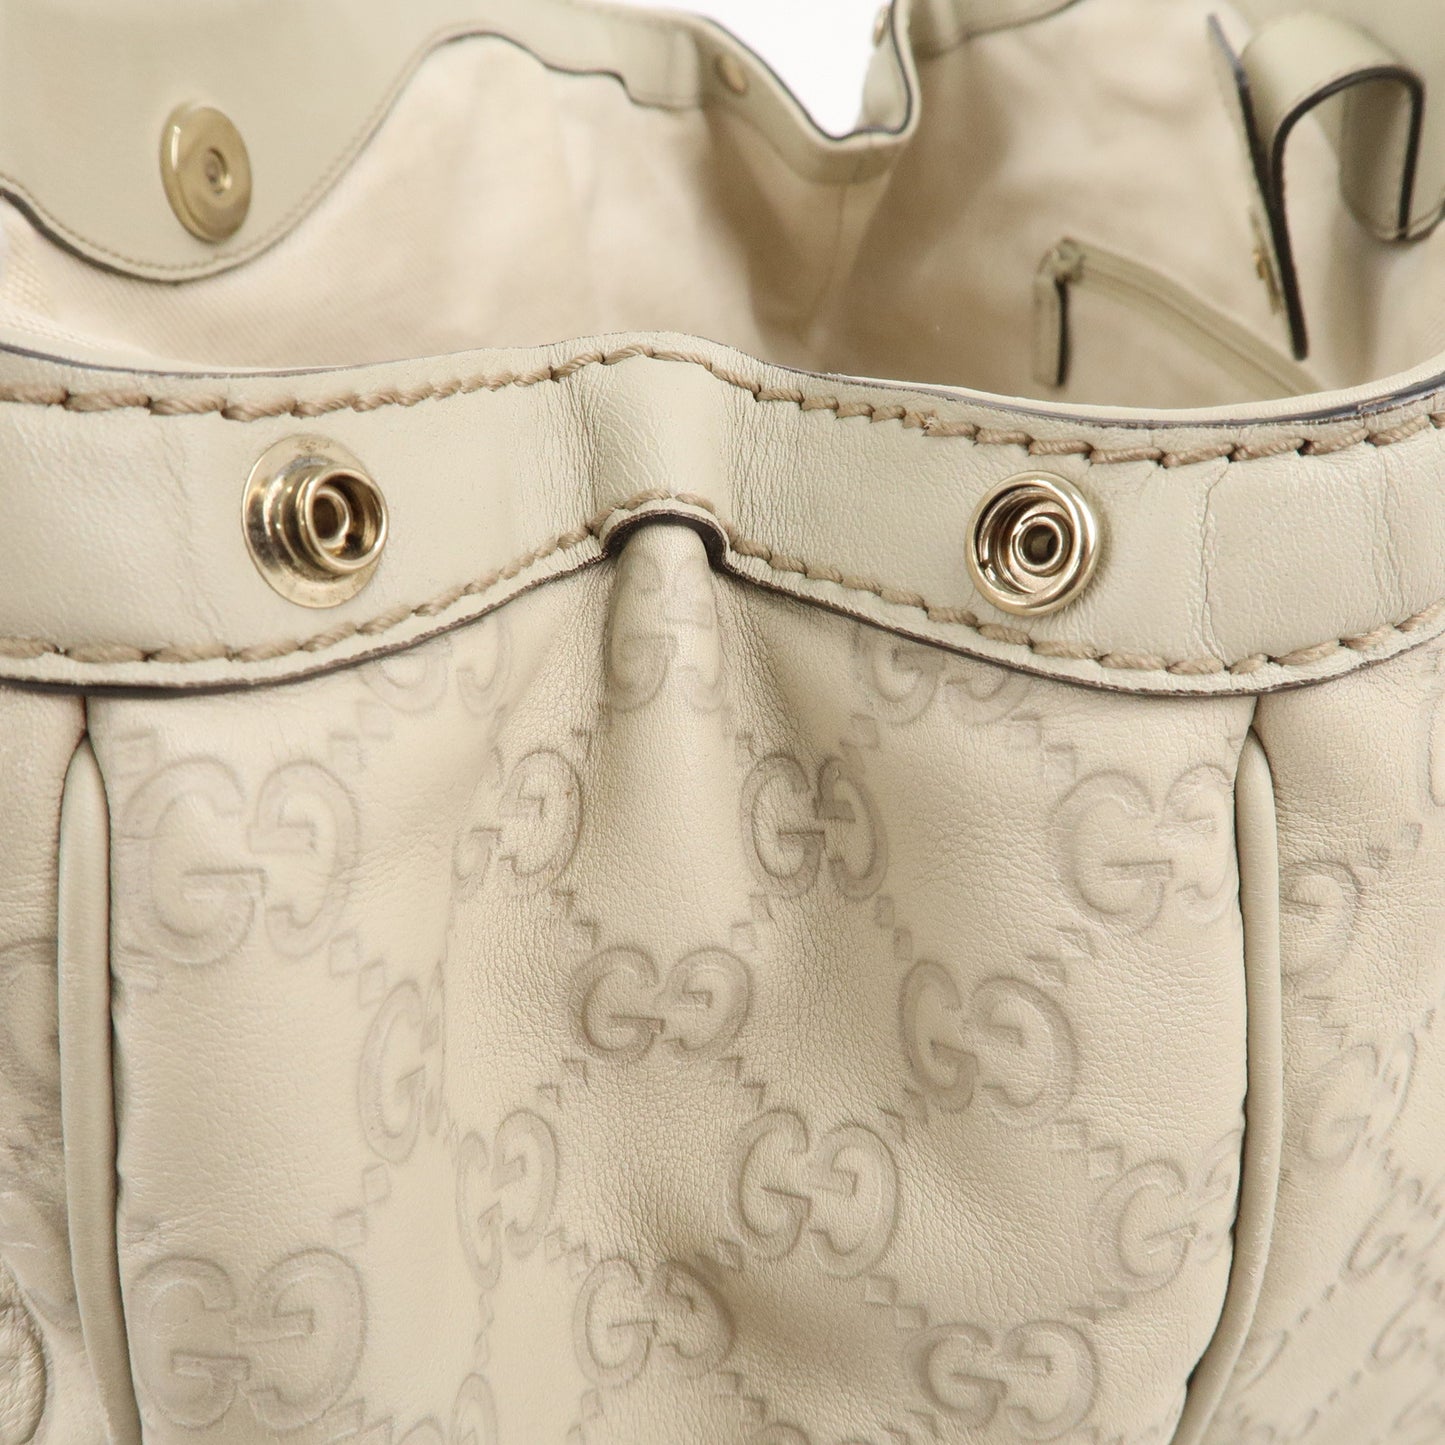 At Auction: Gucci Ivory Woven Leather Sukey Tote Bag